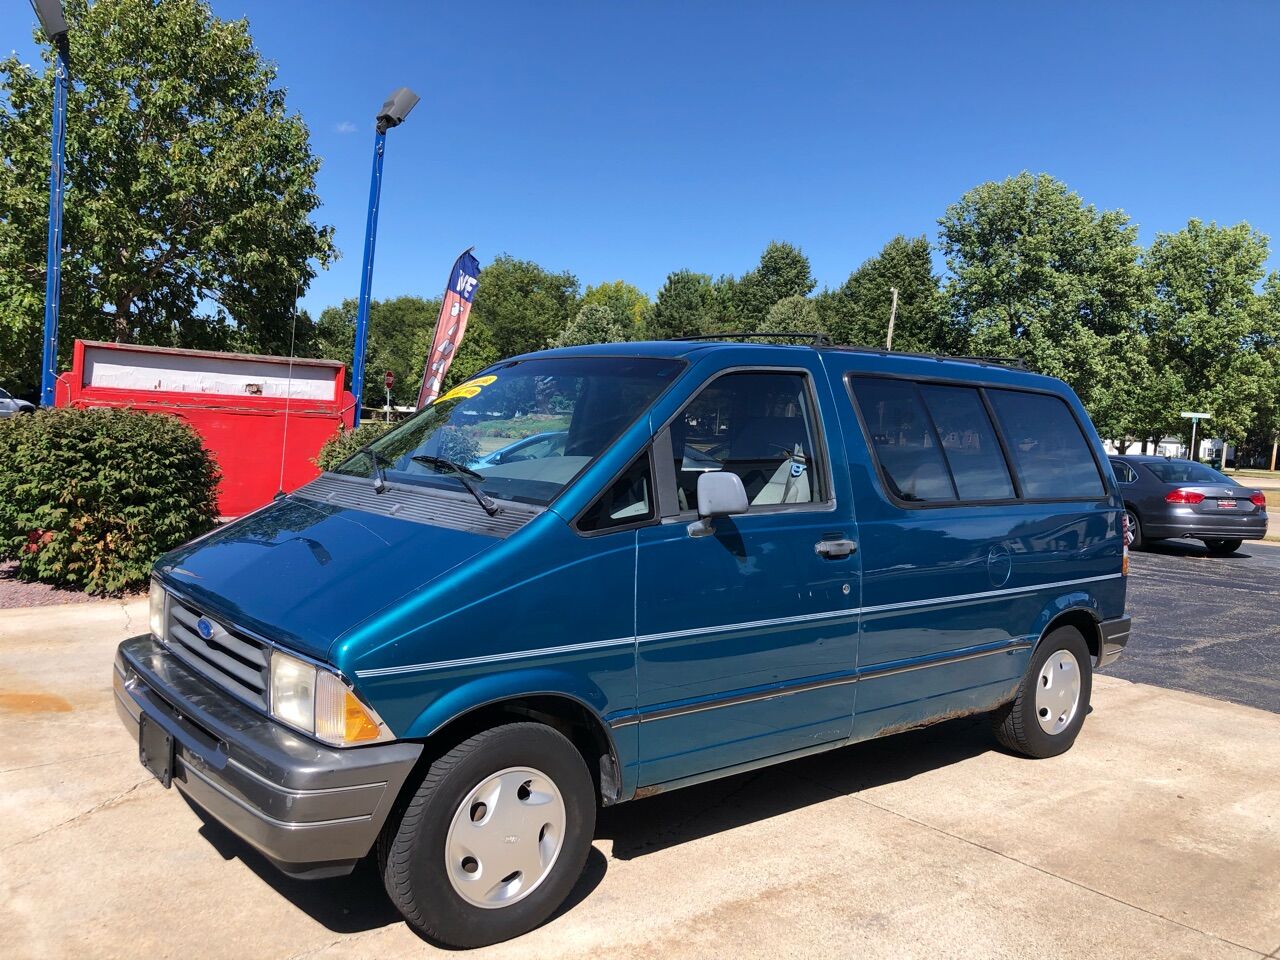 Used Ford Aerostar For Sale 